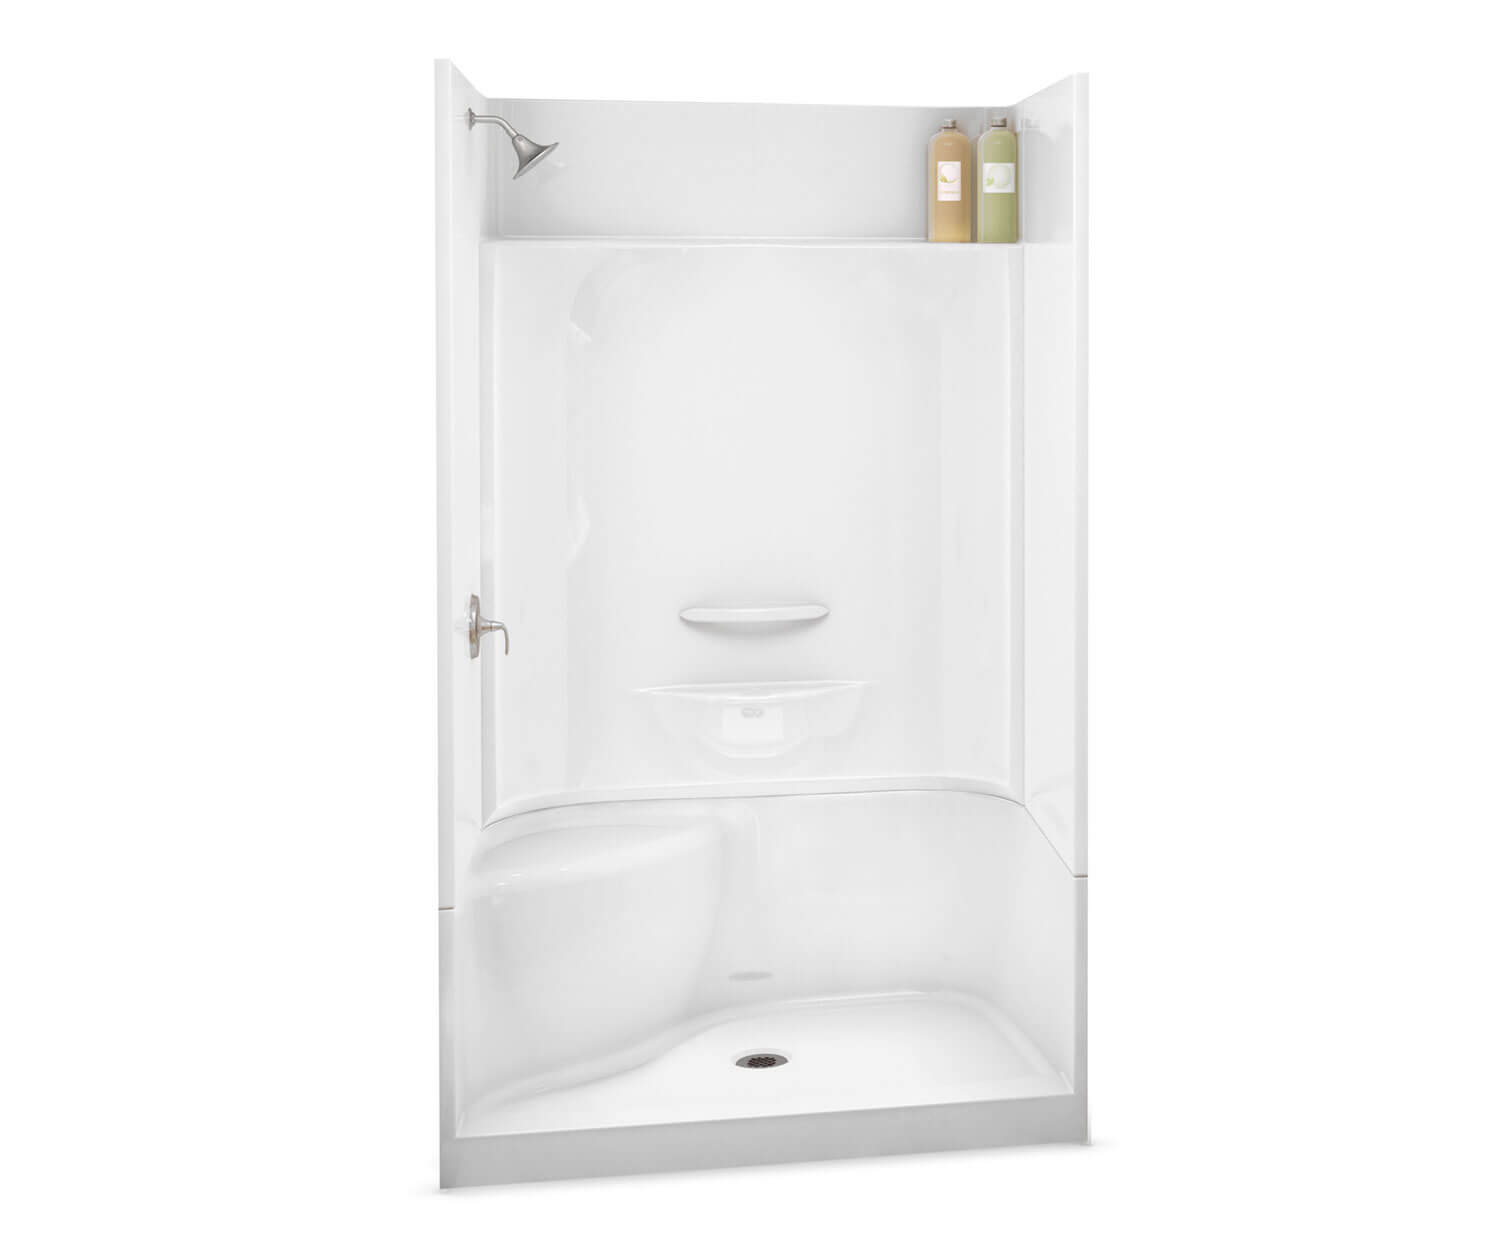 KDS 3448 AcrylX Alcove Center Drain Four-Piece Shower in White 